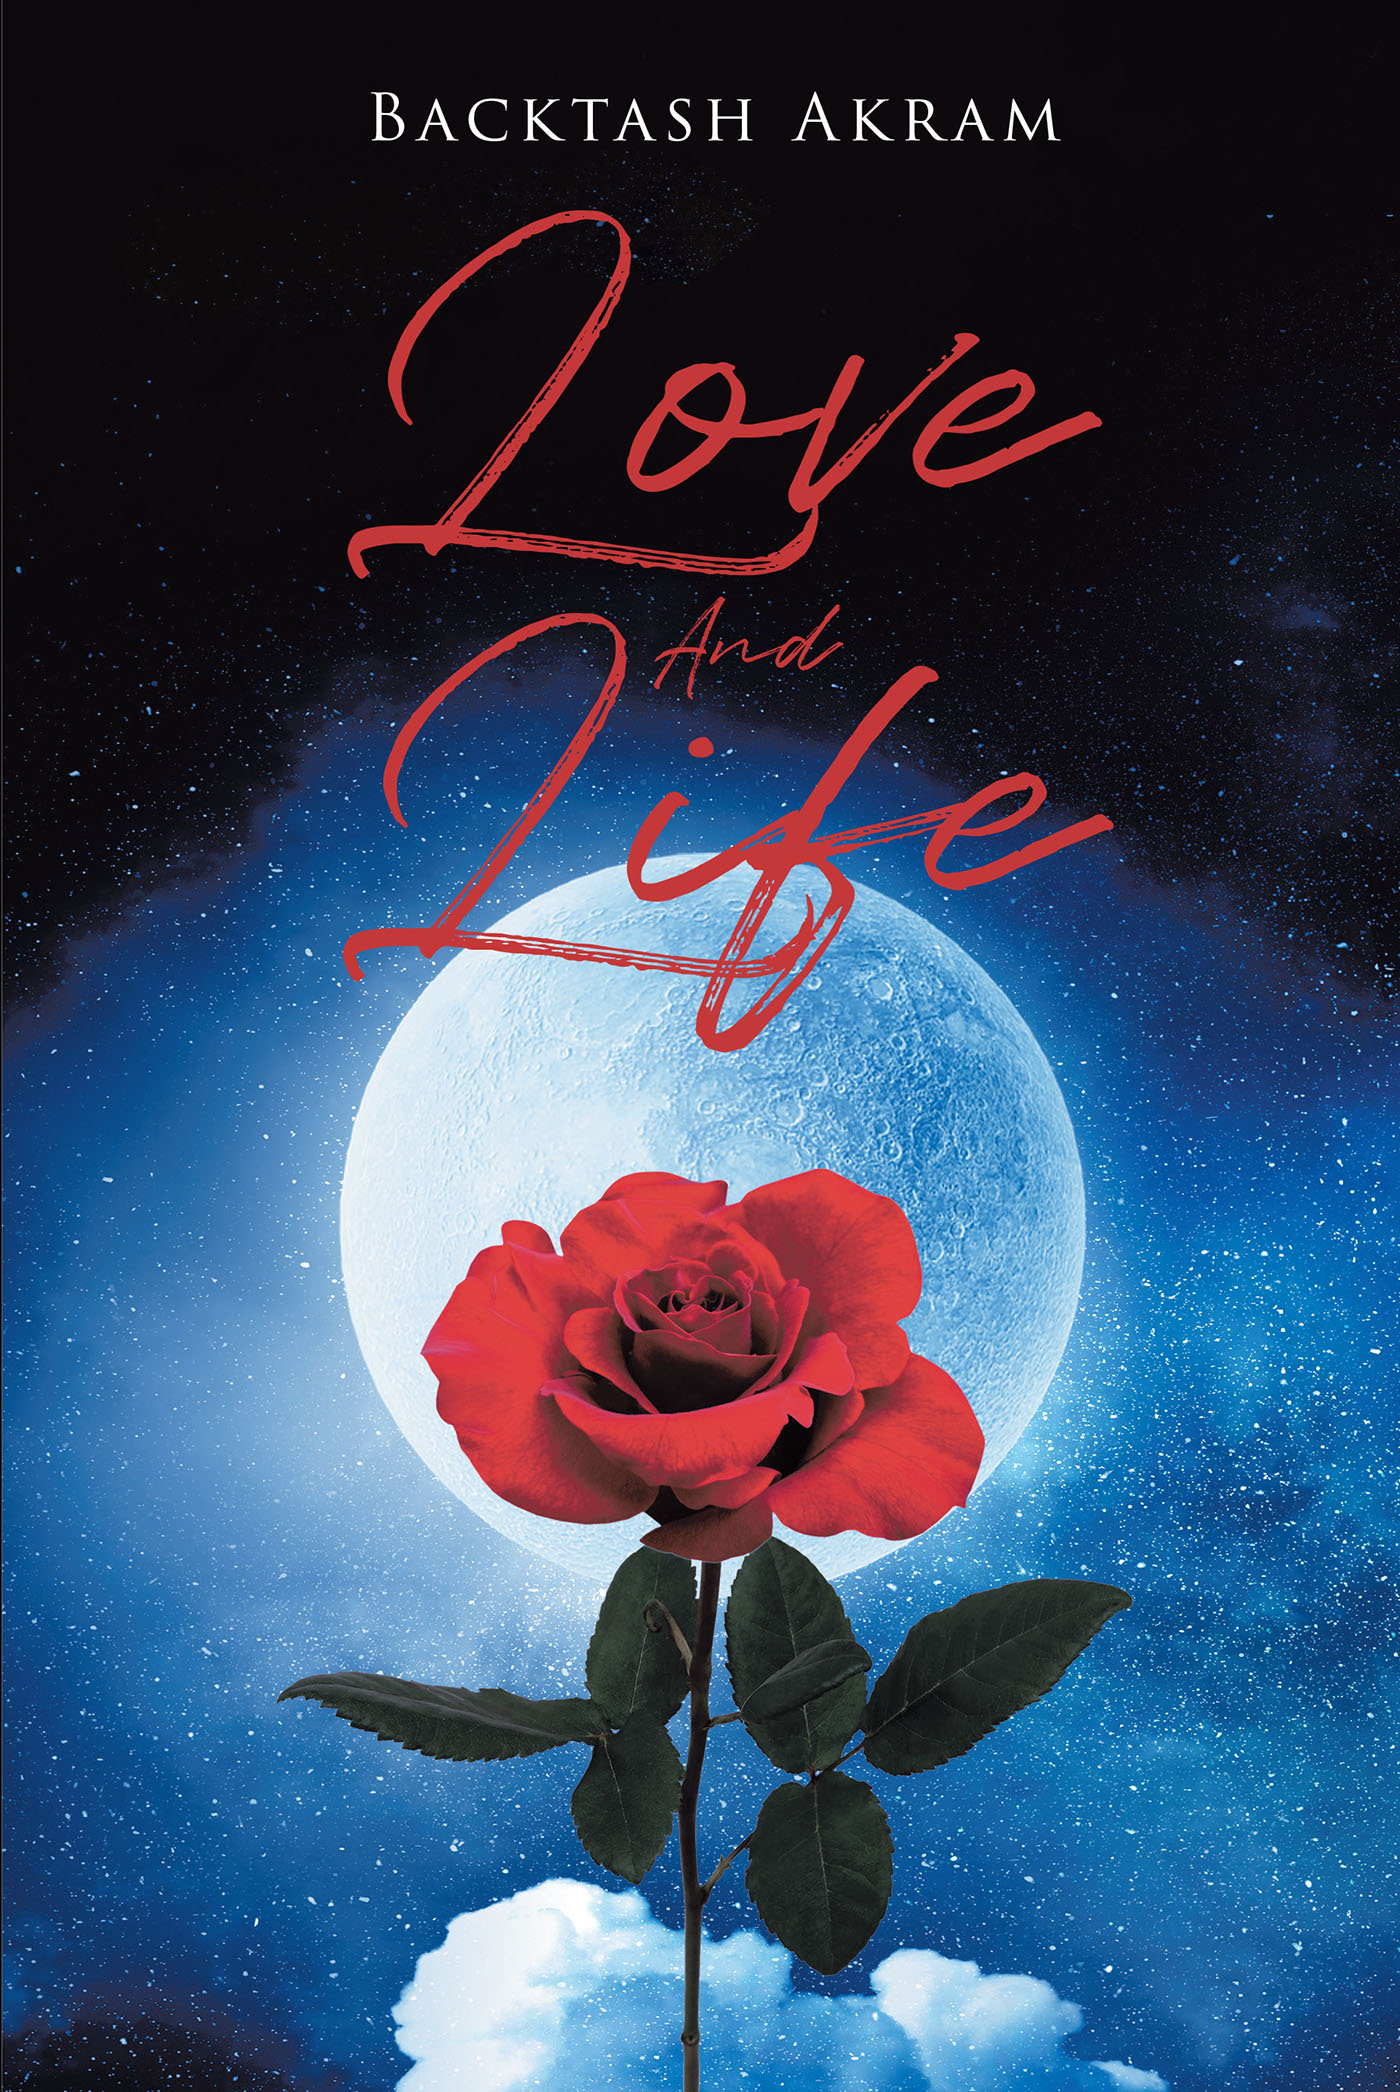 Author Backtash Akram’s New Book, "Love and Life," is a Thought-Provoking Compilation of Observations of the World, Told Through the Author's Gift of Poetry